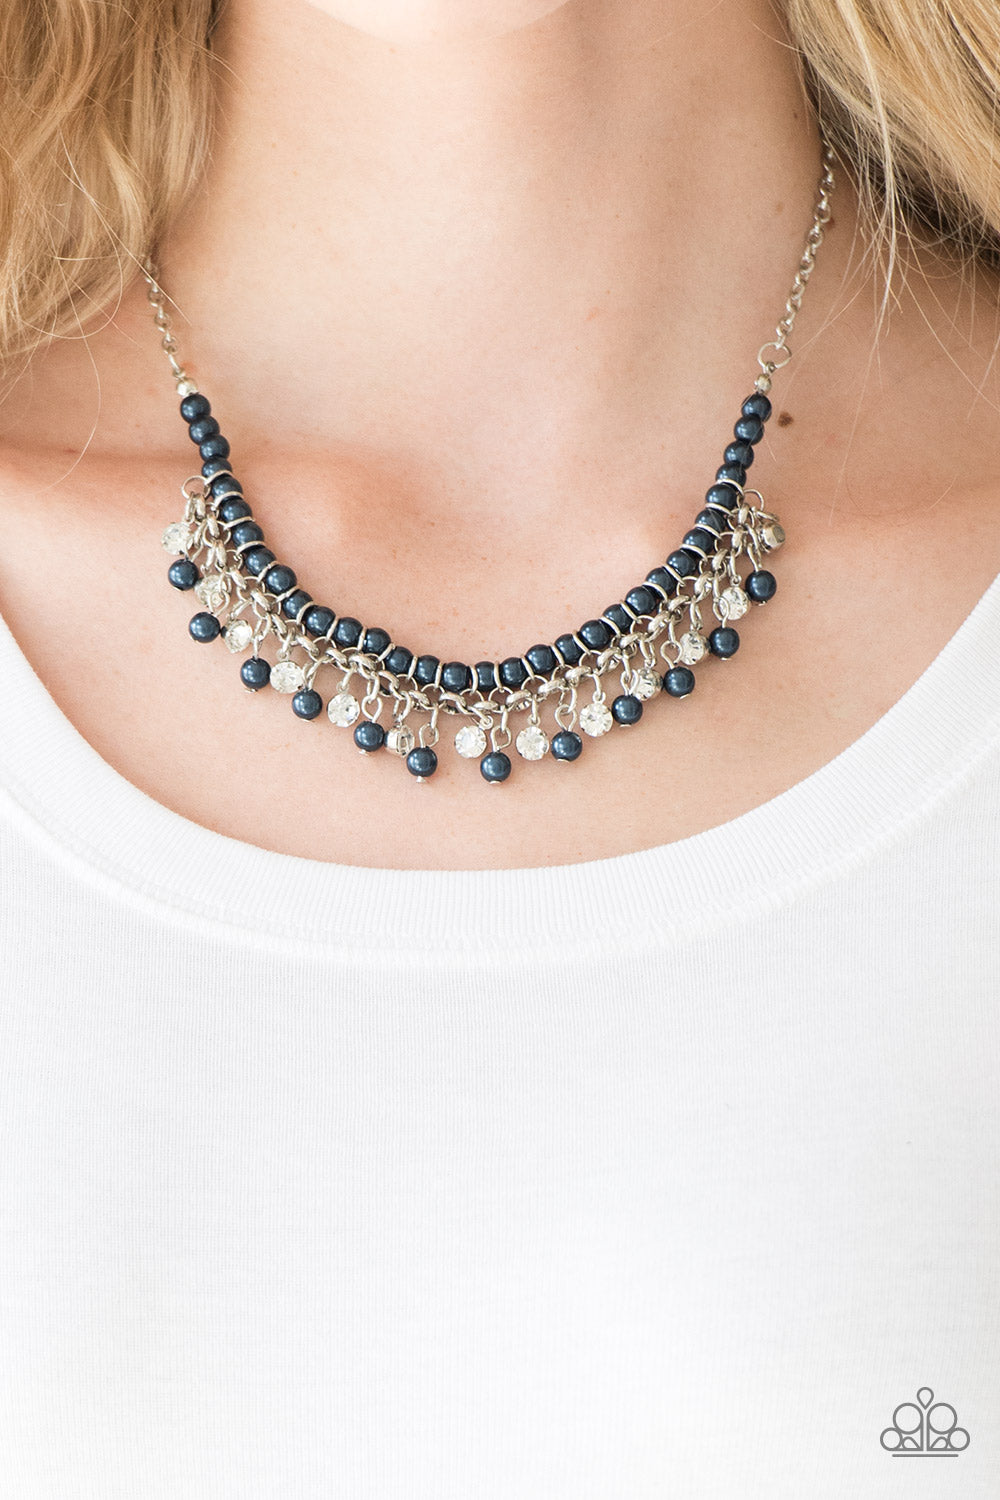 A Touch of CLASSY - Blue Necklace